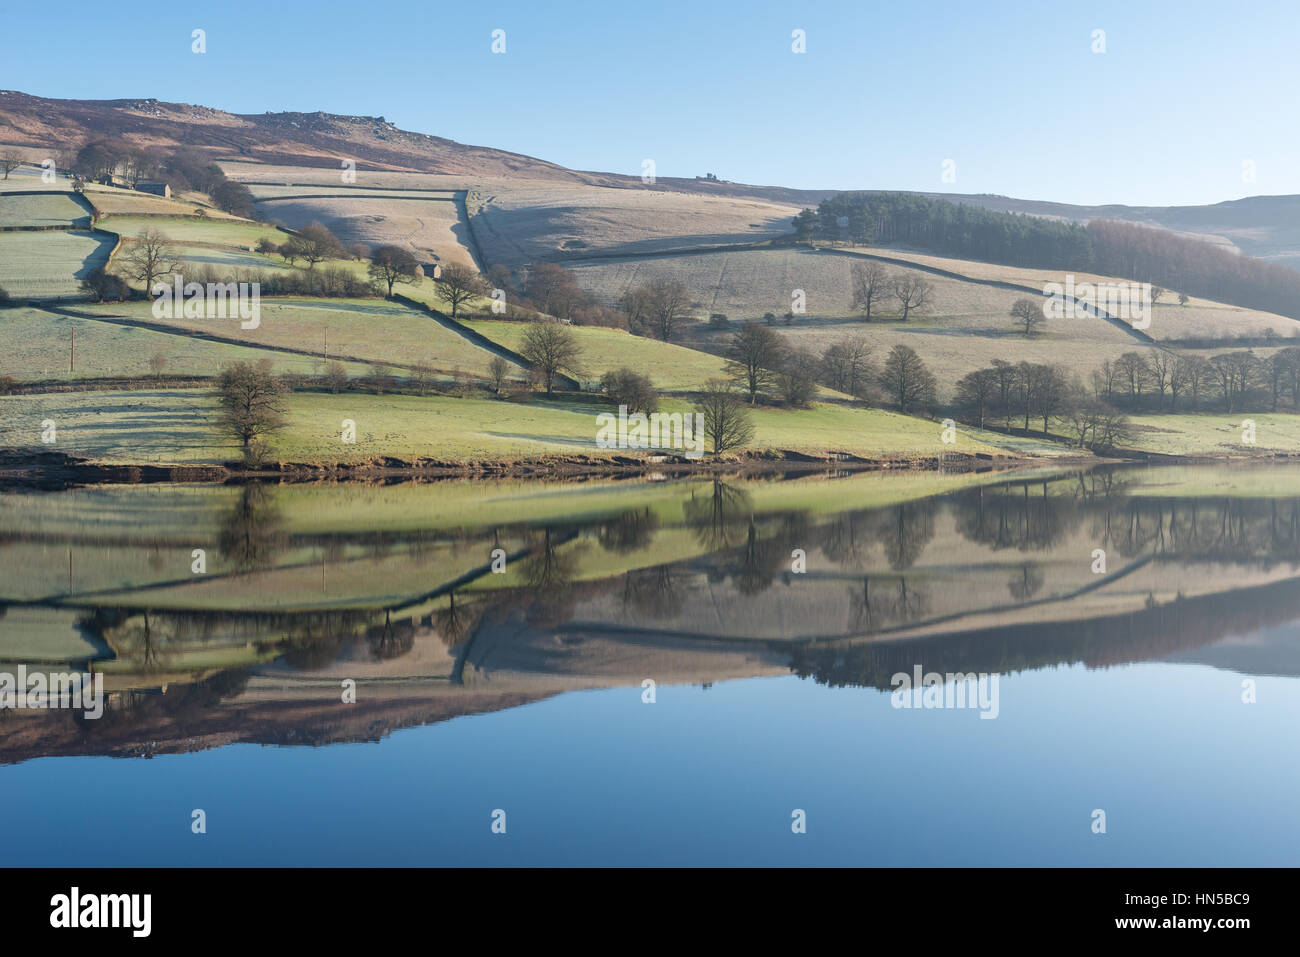 Reflections in still water at Ladybower reservoir, Peak District national park, Derbyshire, England Stock Photo